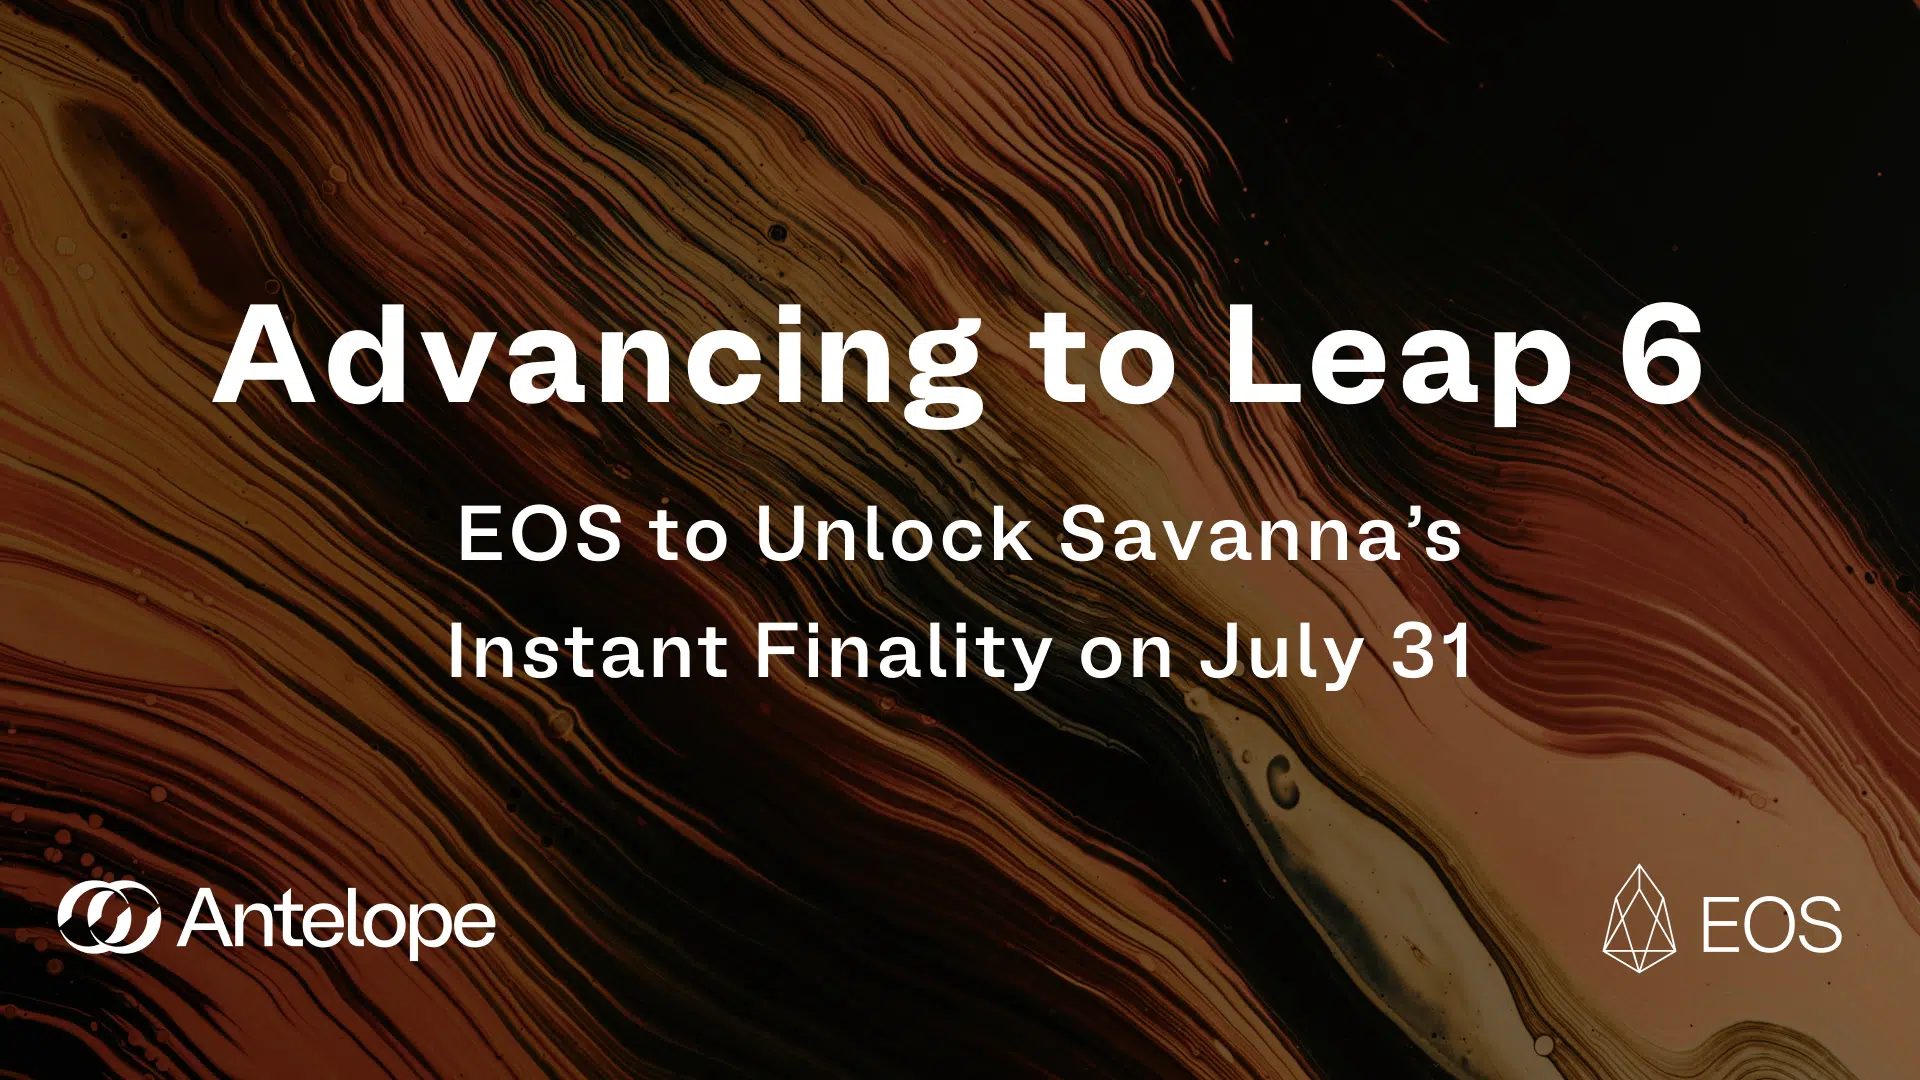 Advancing To Leap 6 - EOS go Unlock Savanna’s Quick Finality on July 31st.